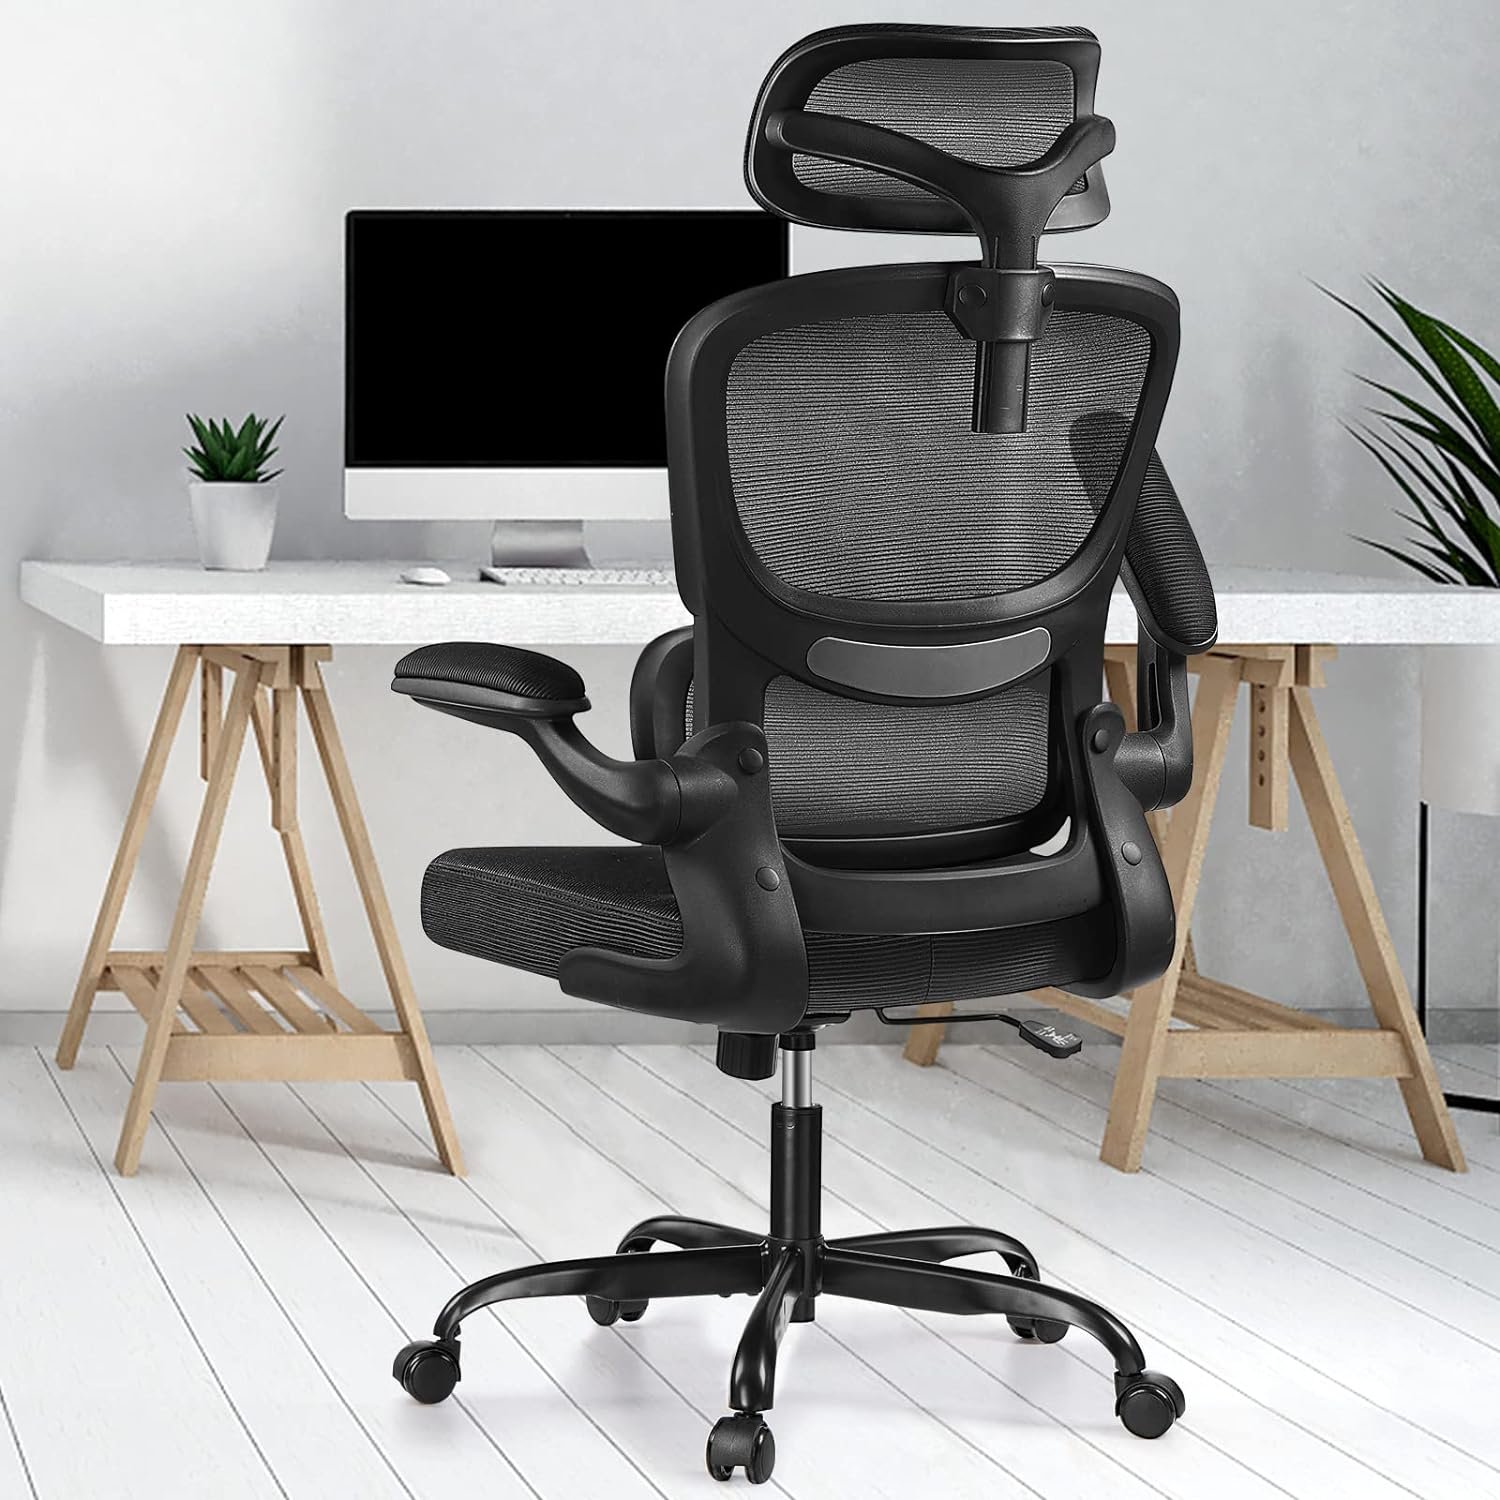 Razzor Ergonomic Office Chair, High Back Mesh Desk Chair with Lumbar Support and Adjustable Headrest, Computer Gaming Chair, Executive Swivel Chair for Home Office